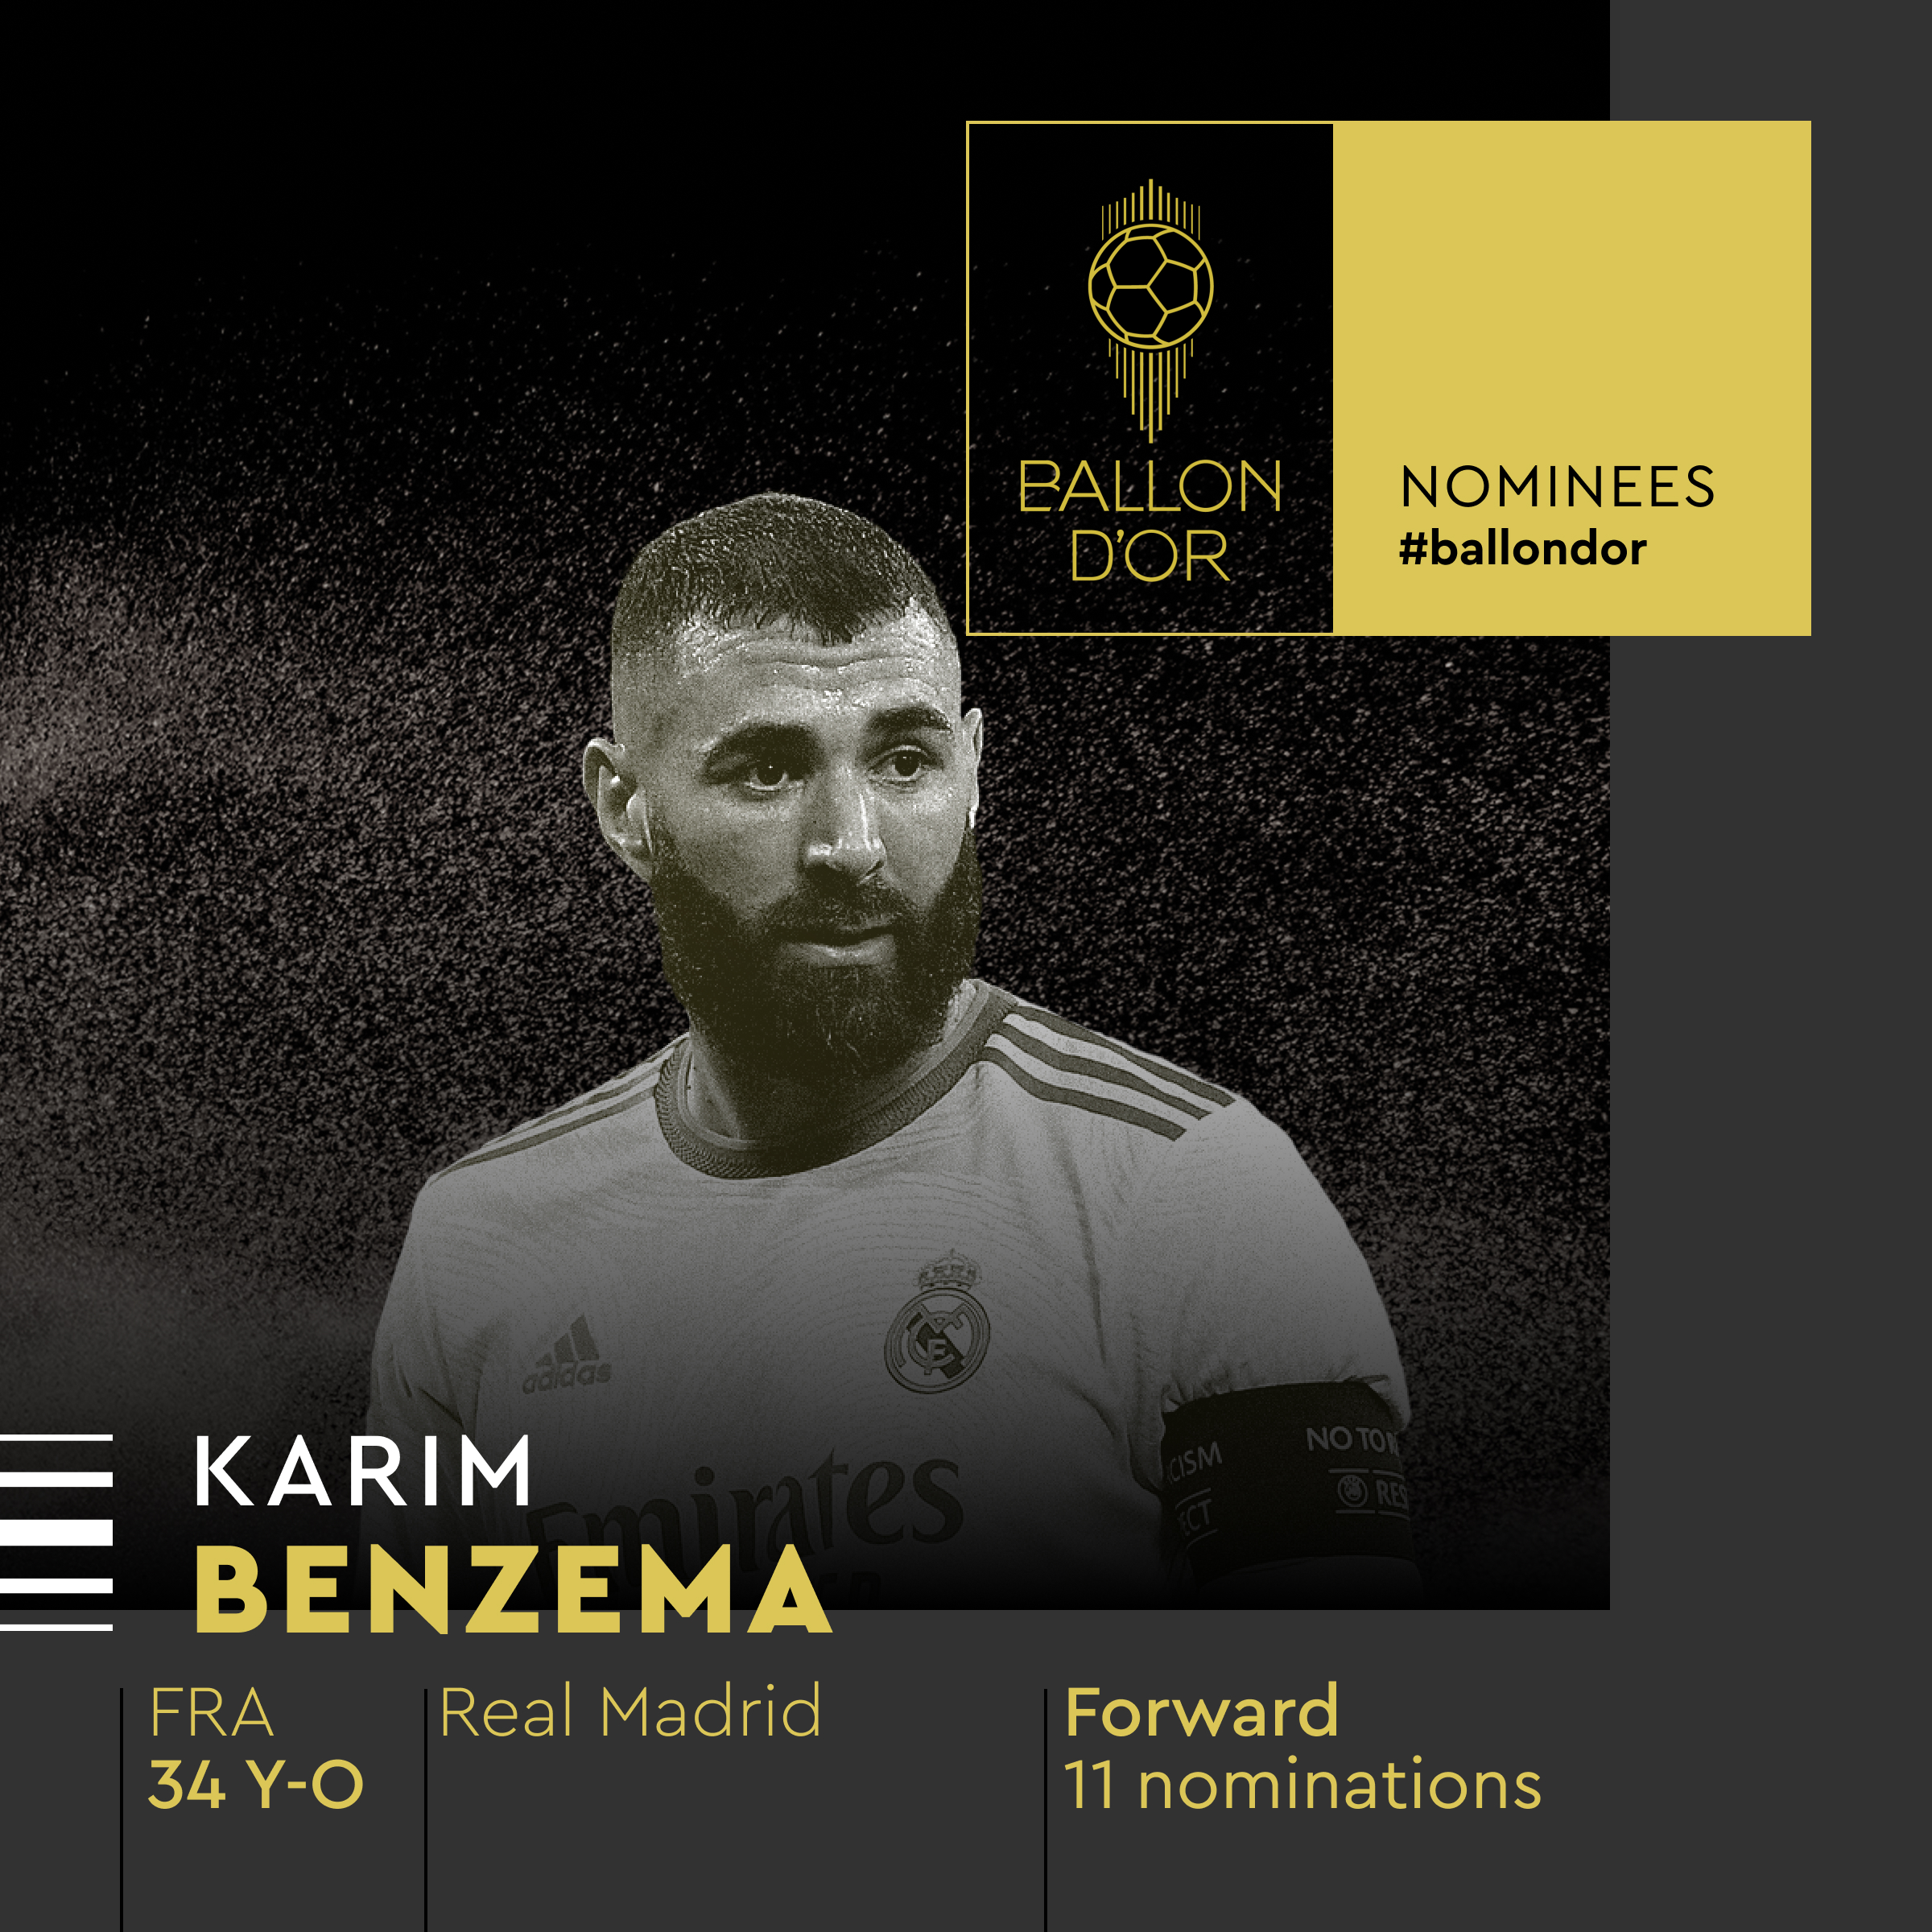 UEFA Men's Player of the Year nominees: Benzema, Courtois, De